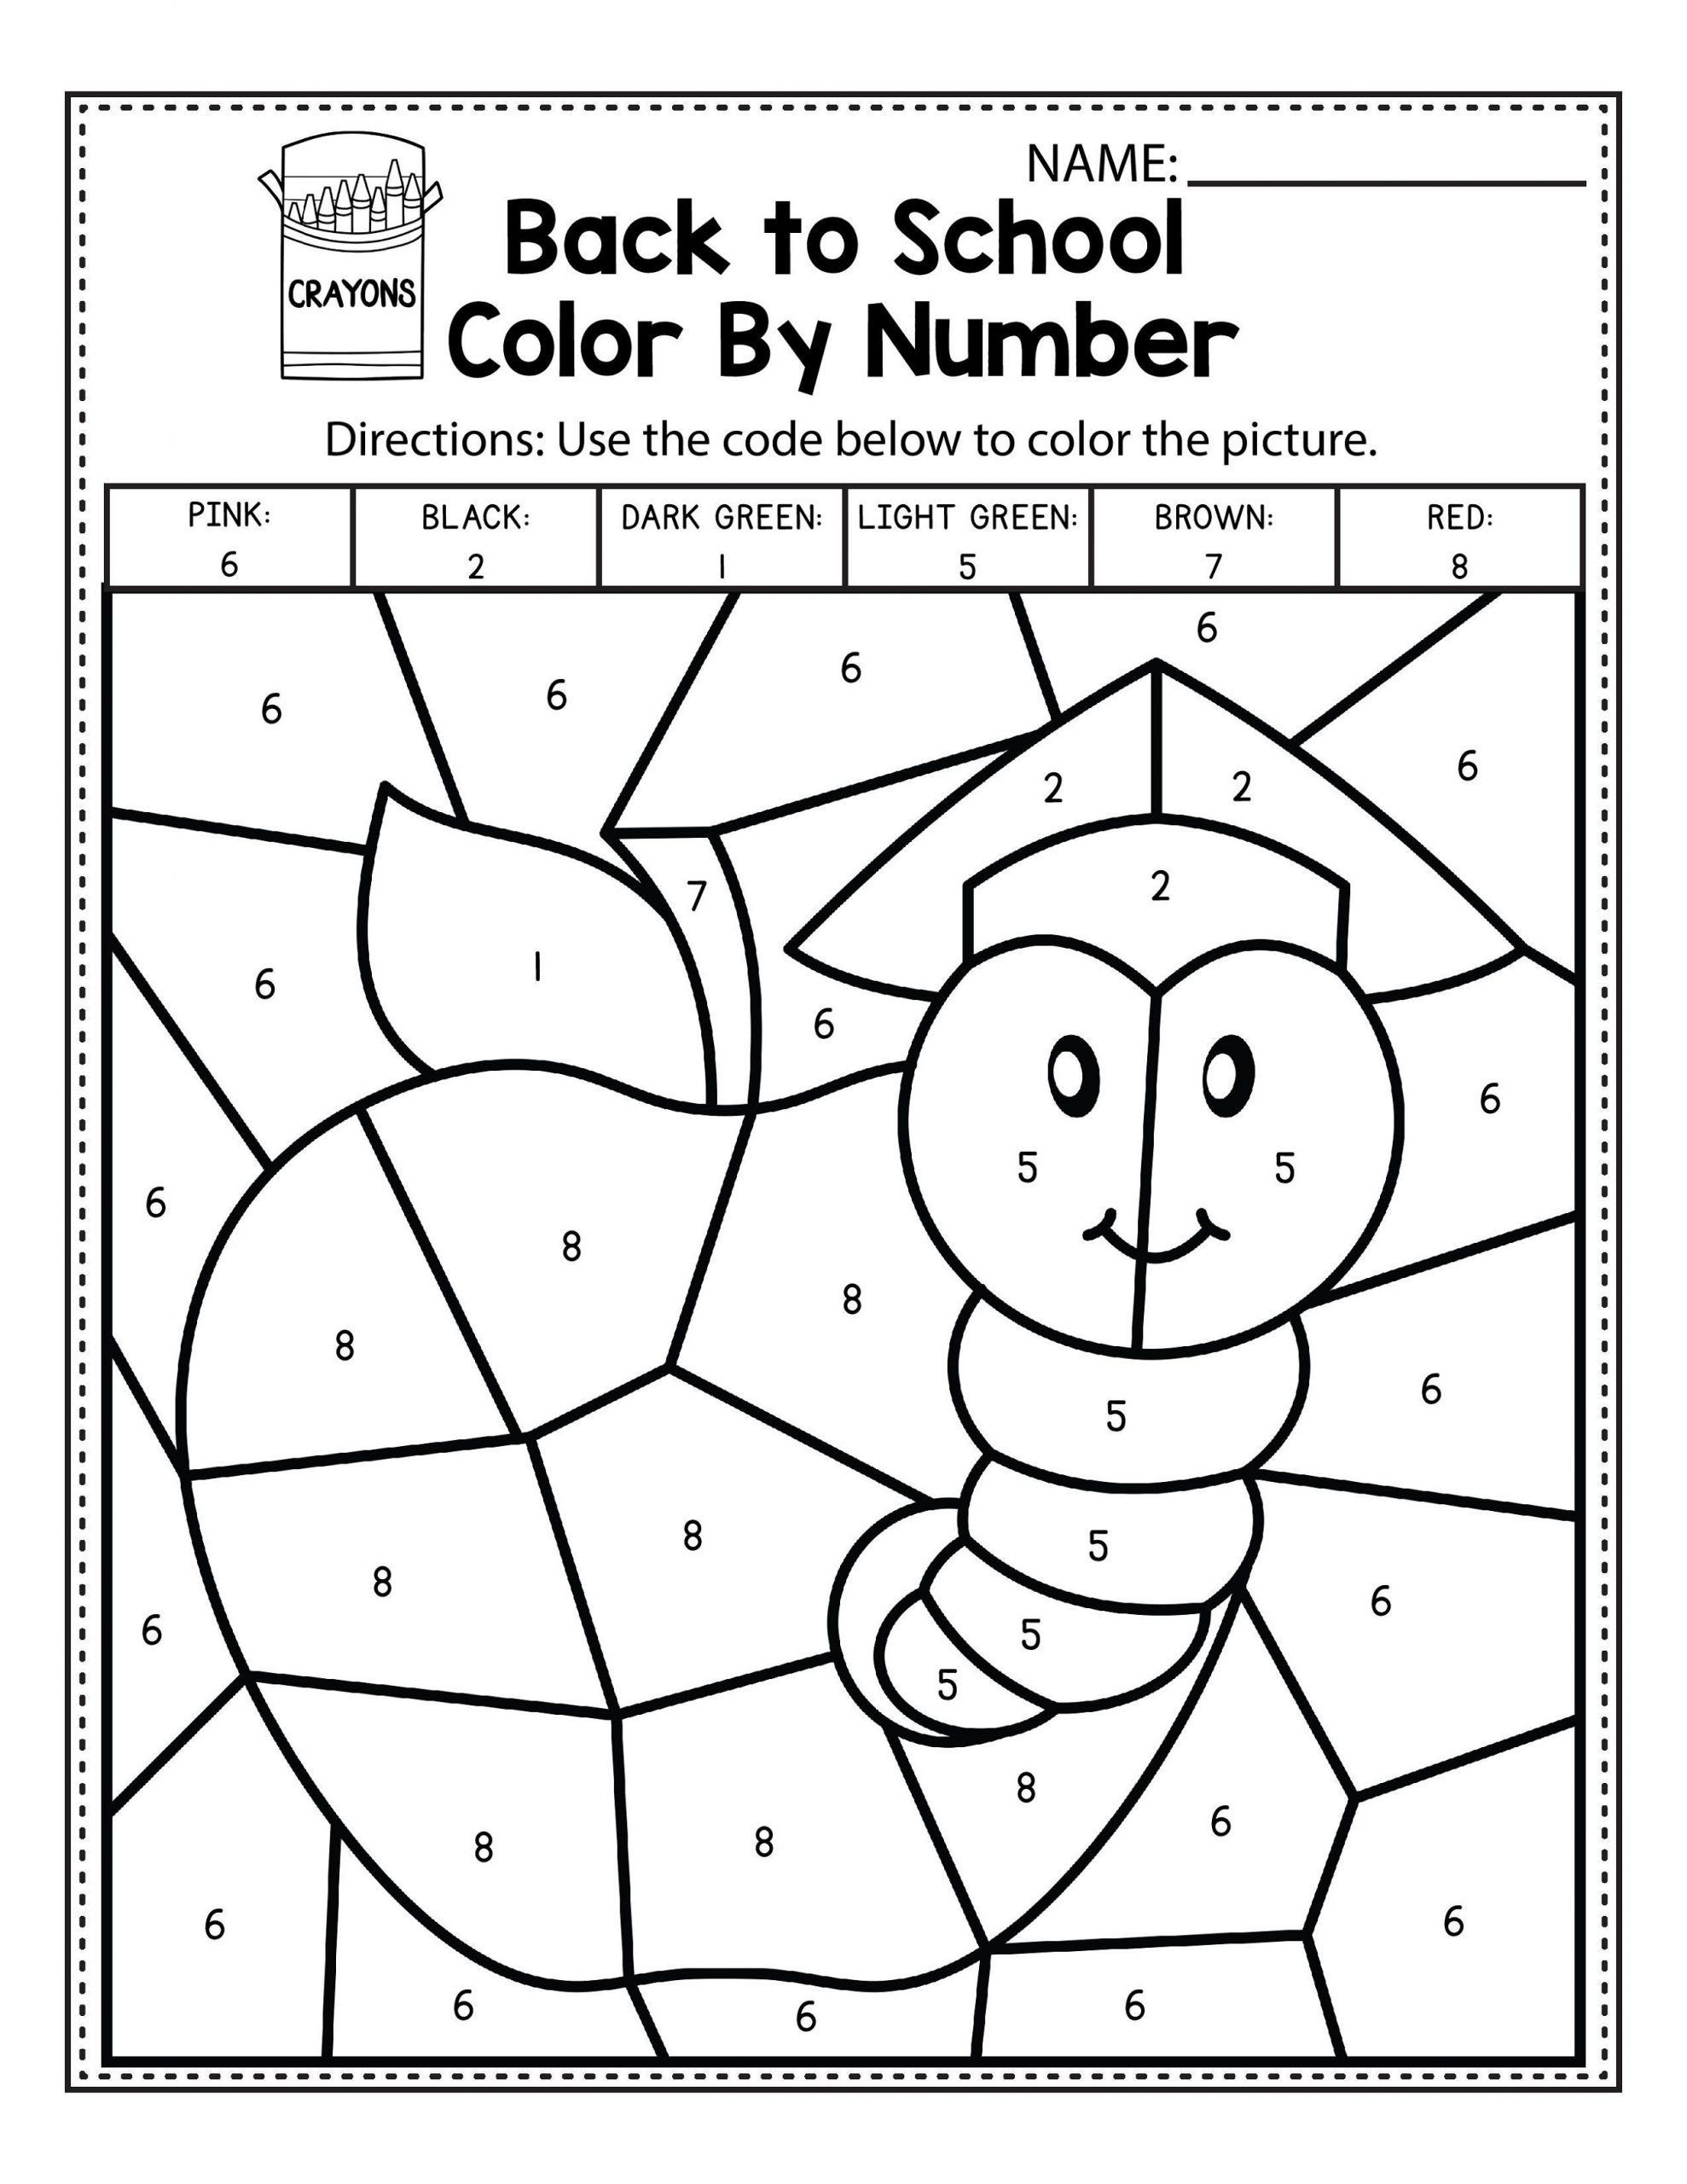 Disney Easy Color By Number Worksheets For Kindergarten - This page has